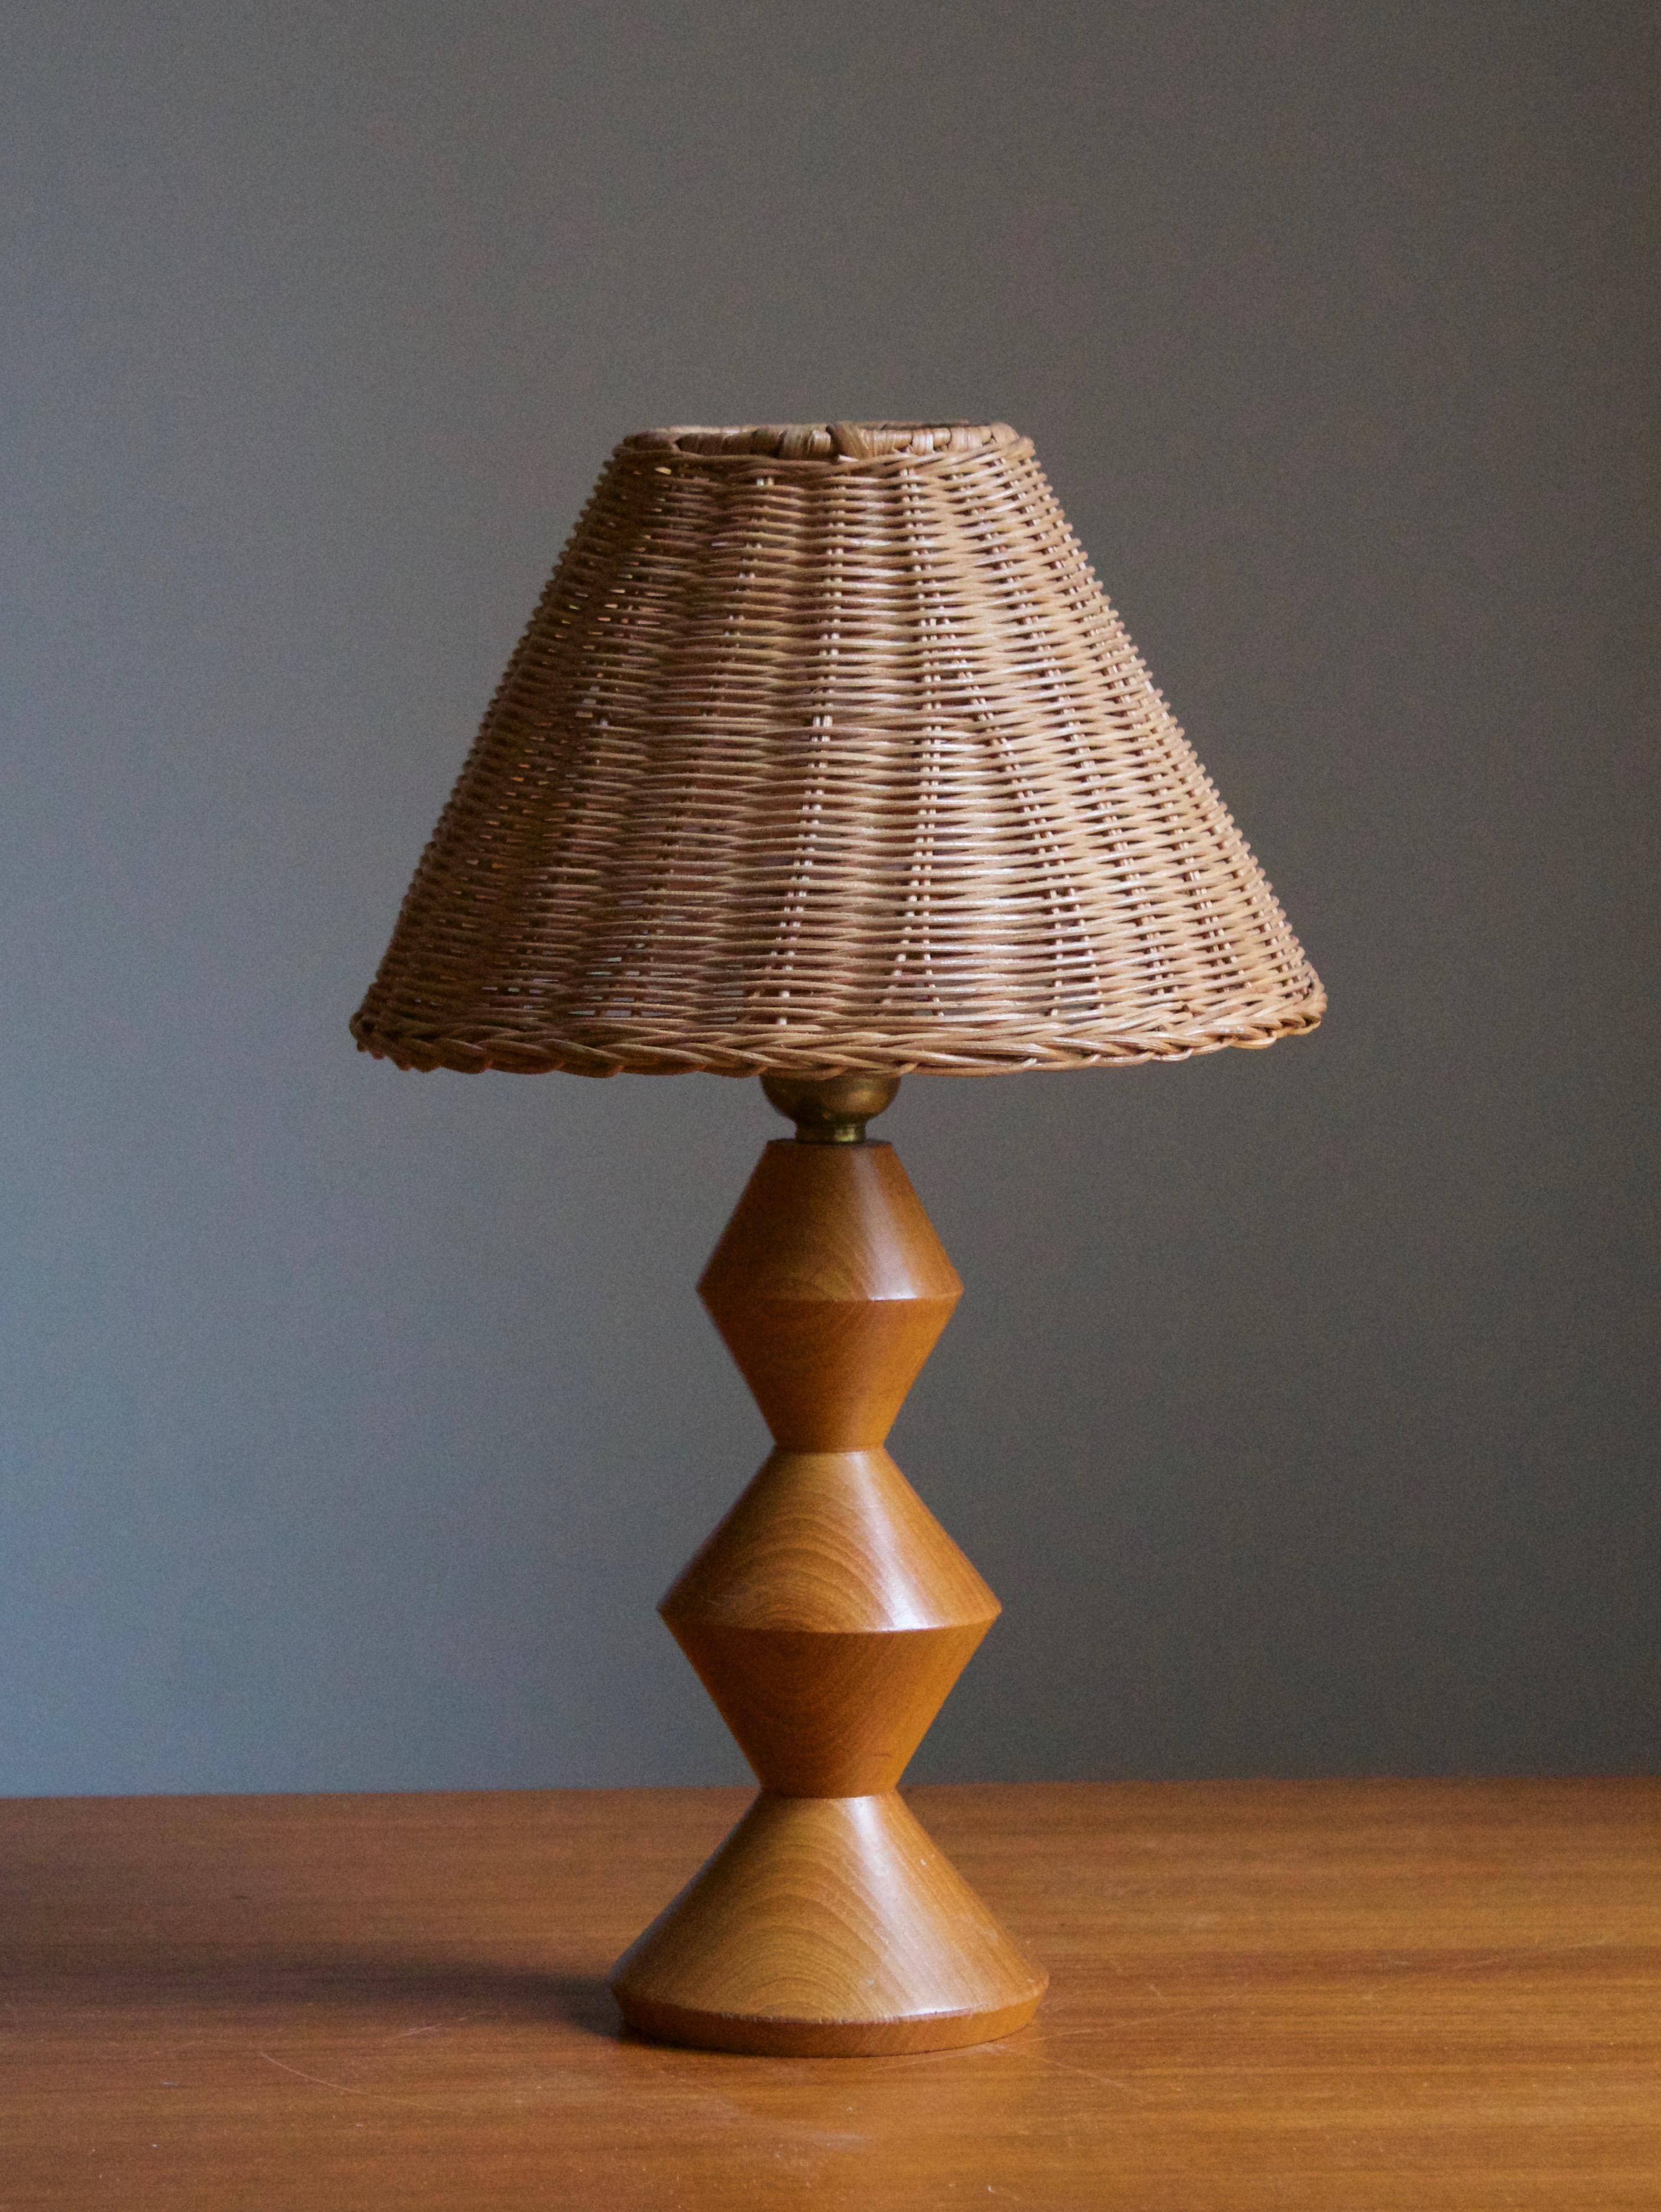 A table lamp designed and produced in Sweden in, c. 1960s.

Stated dimensions exclude lampshade, height includes the socket. Sold without lampshade.